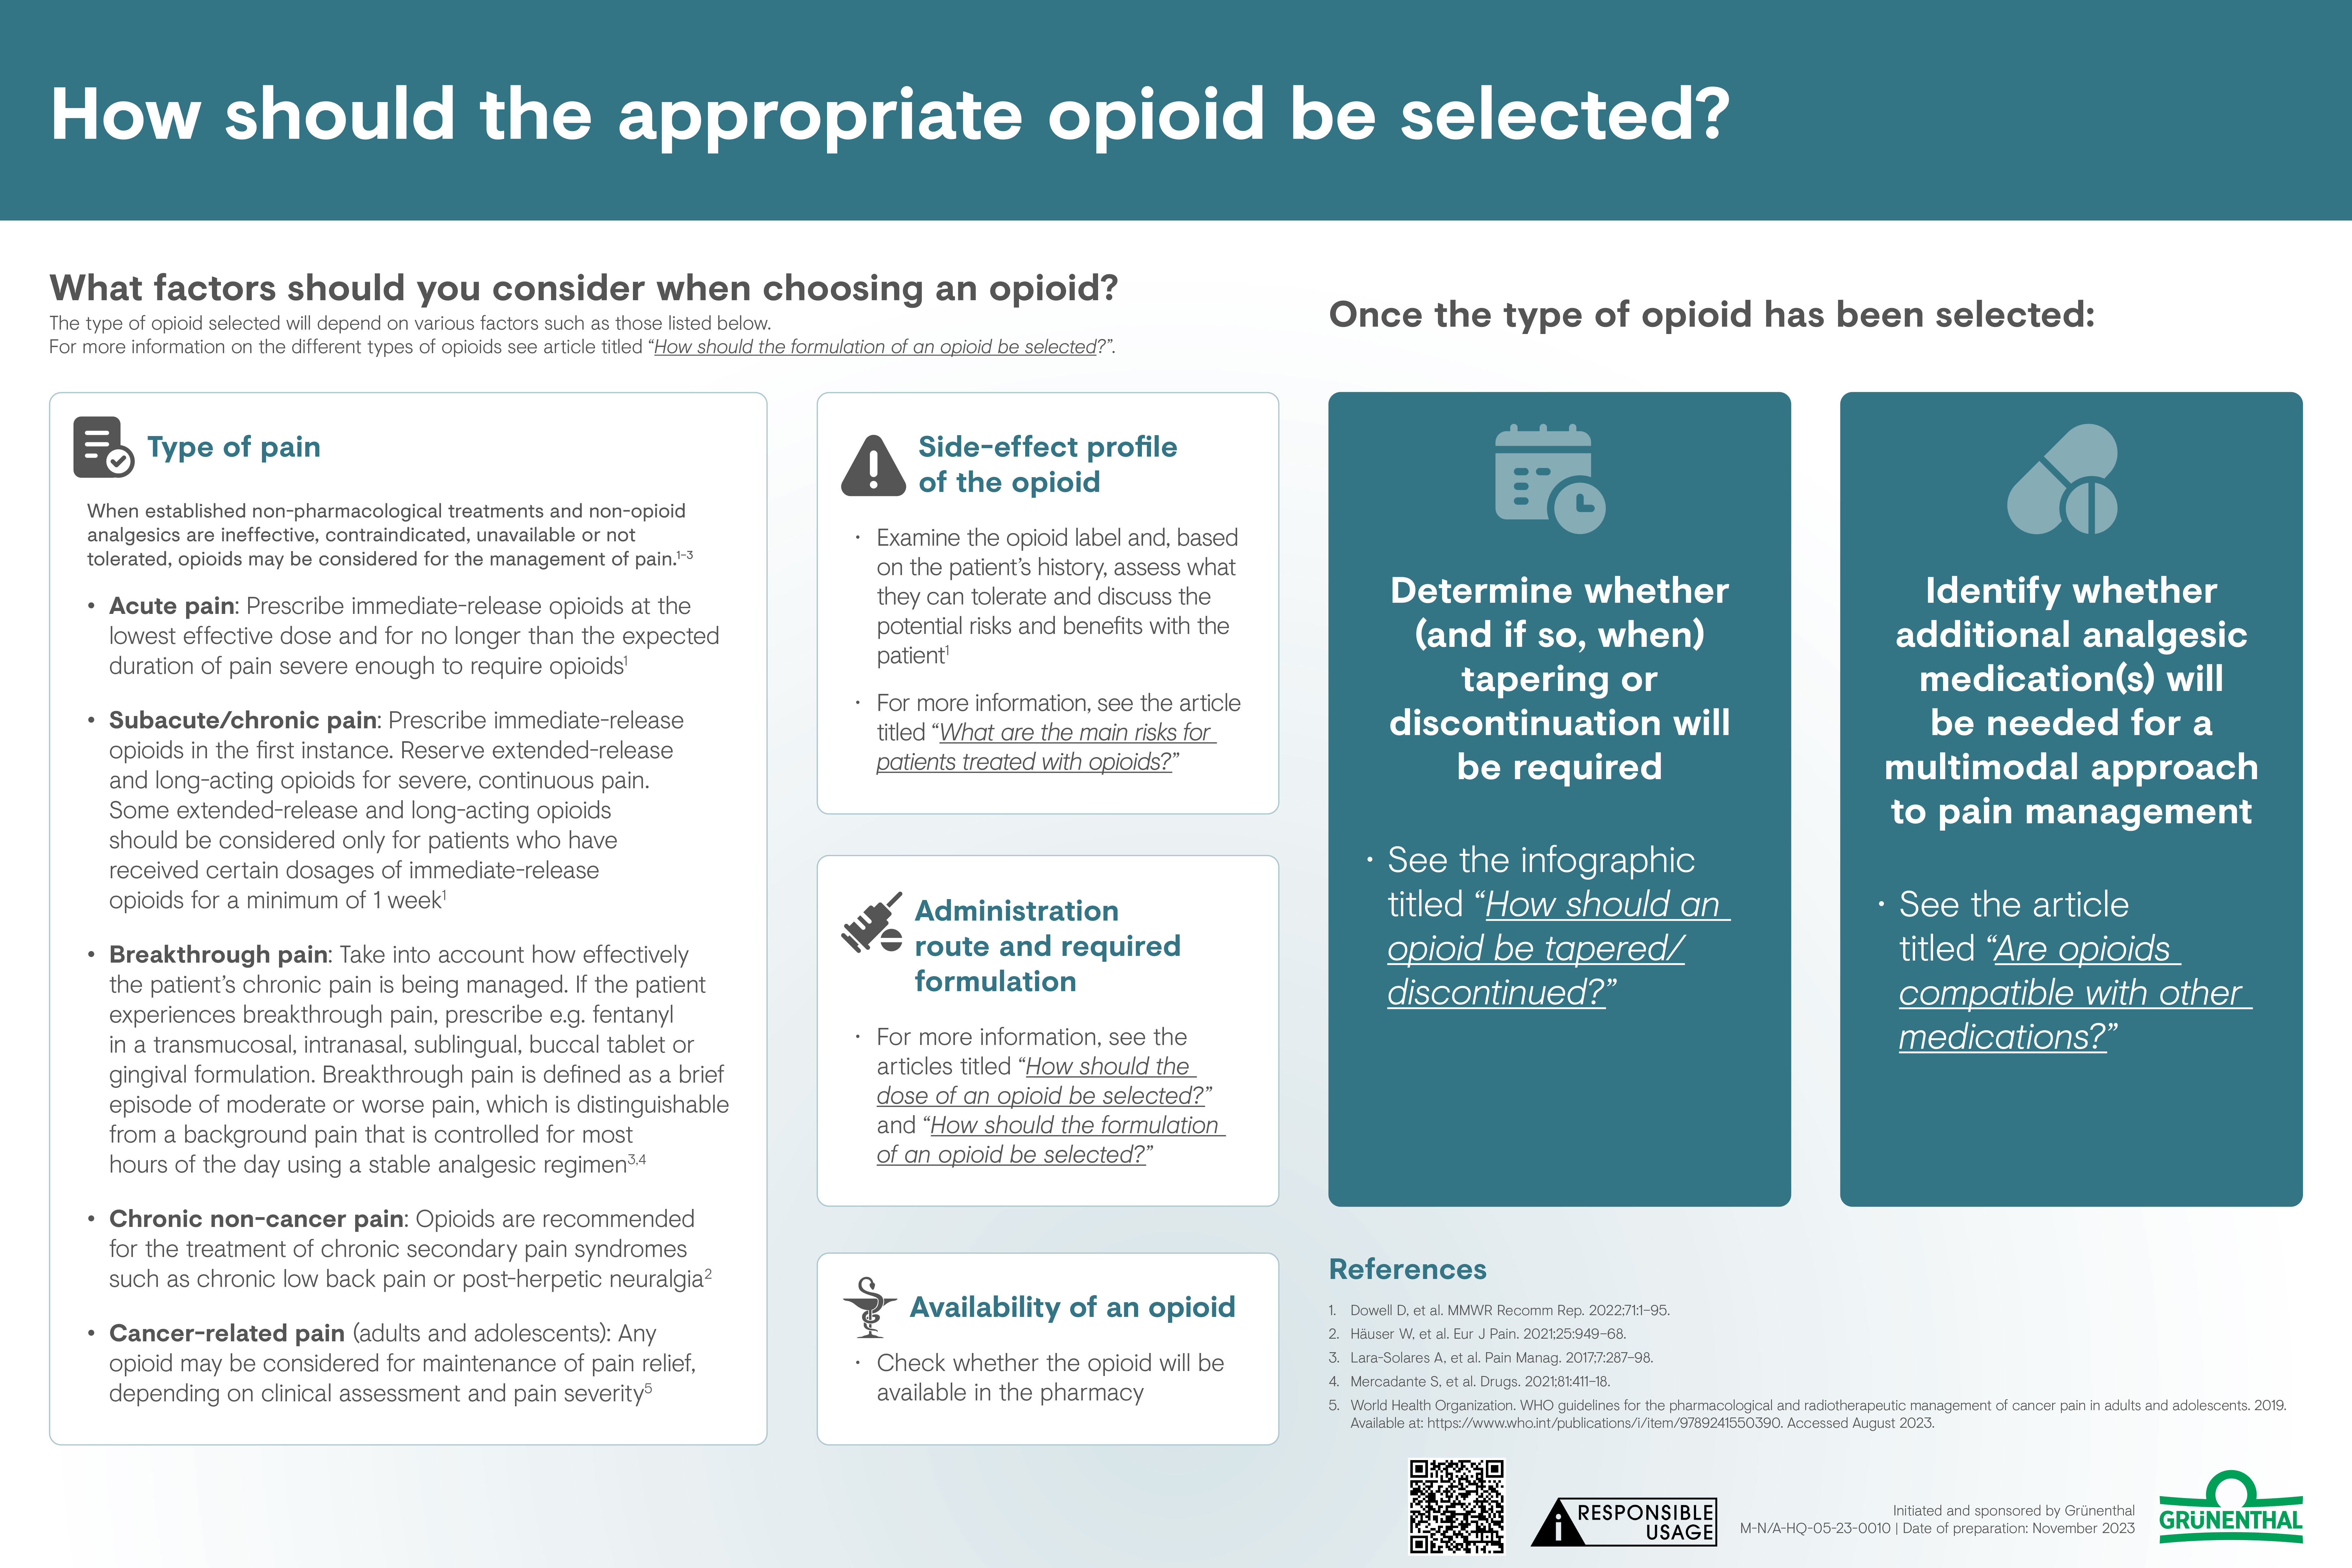 How should the appropriate opioid be selected